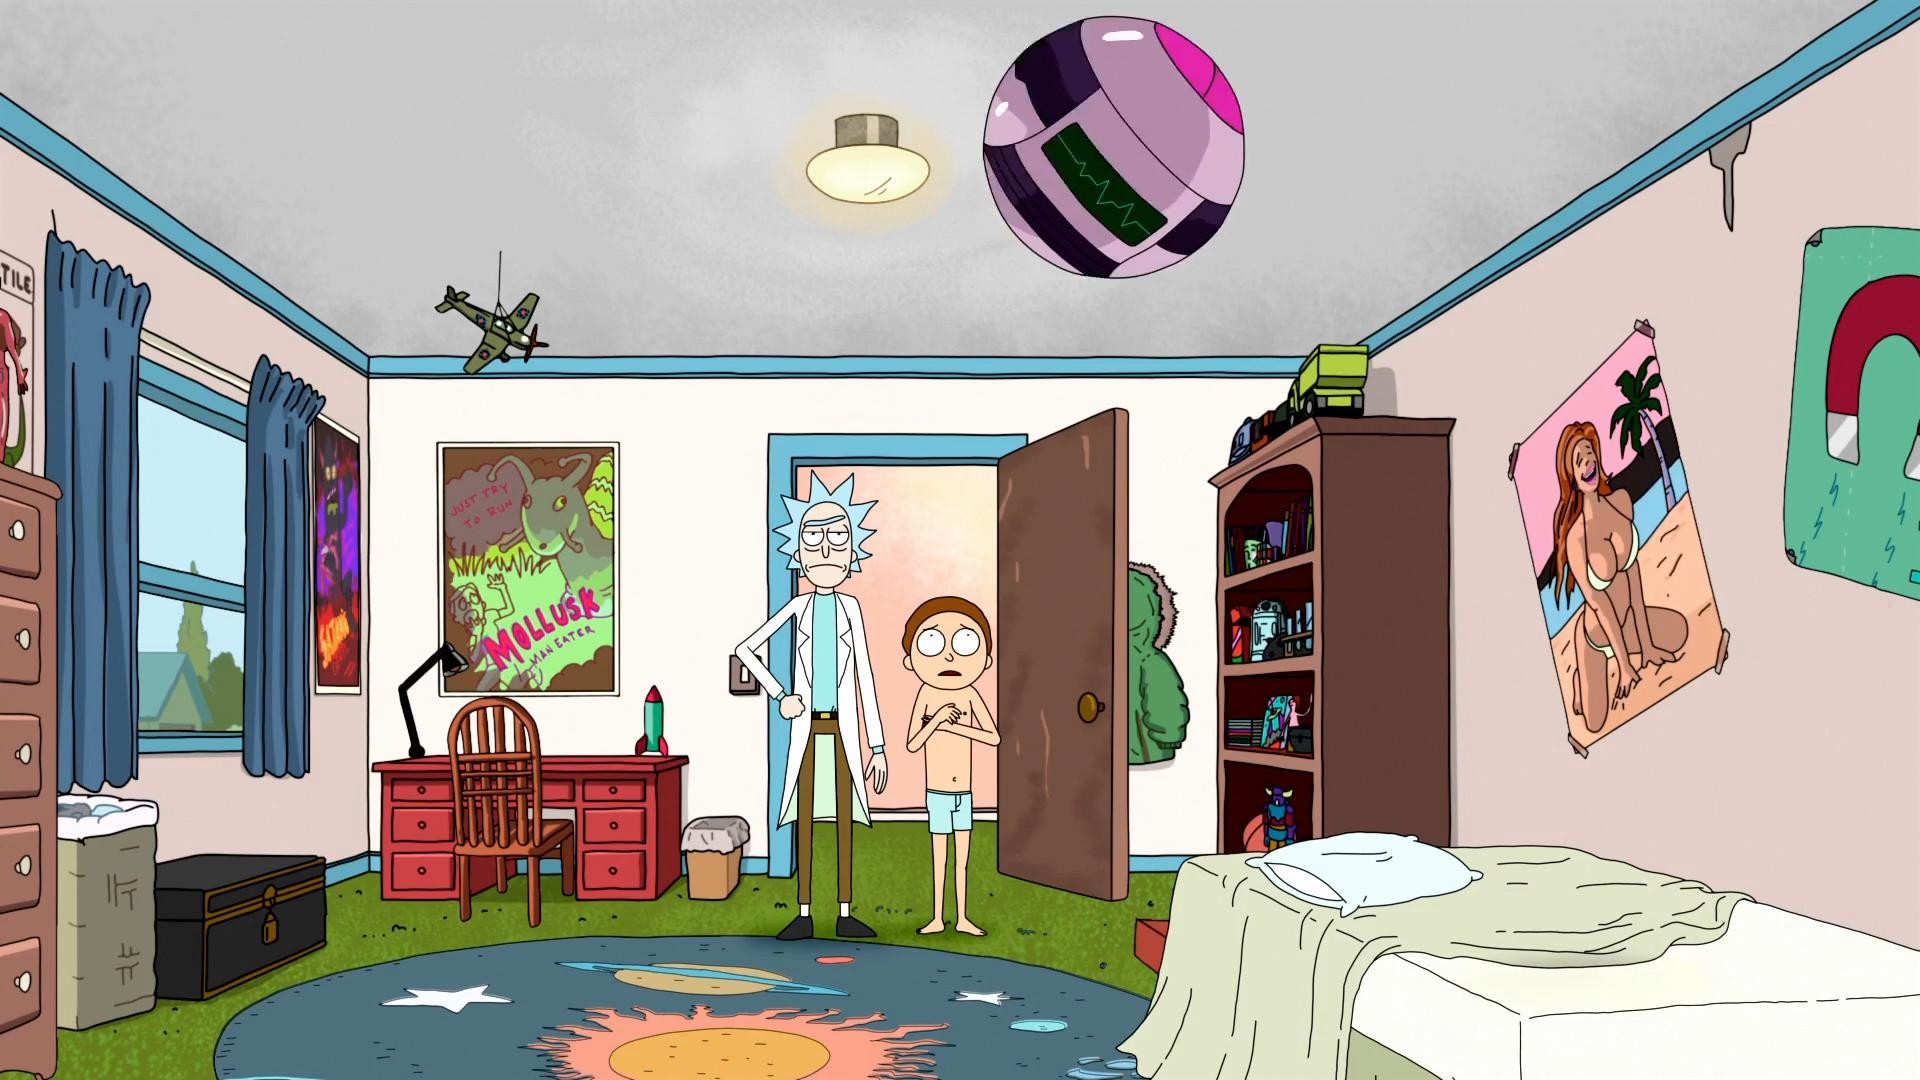 HD New Rick and Morty Backgrounds with resolution 1920X1080 pixel. You can use this wallpaper as background for your desktop Computer Screensavers, Android or iPhone smartphones